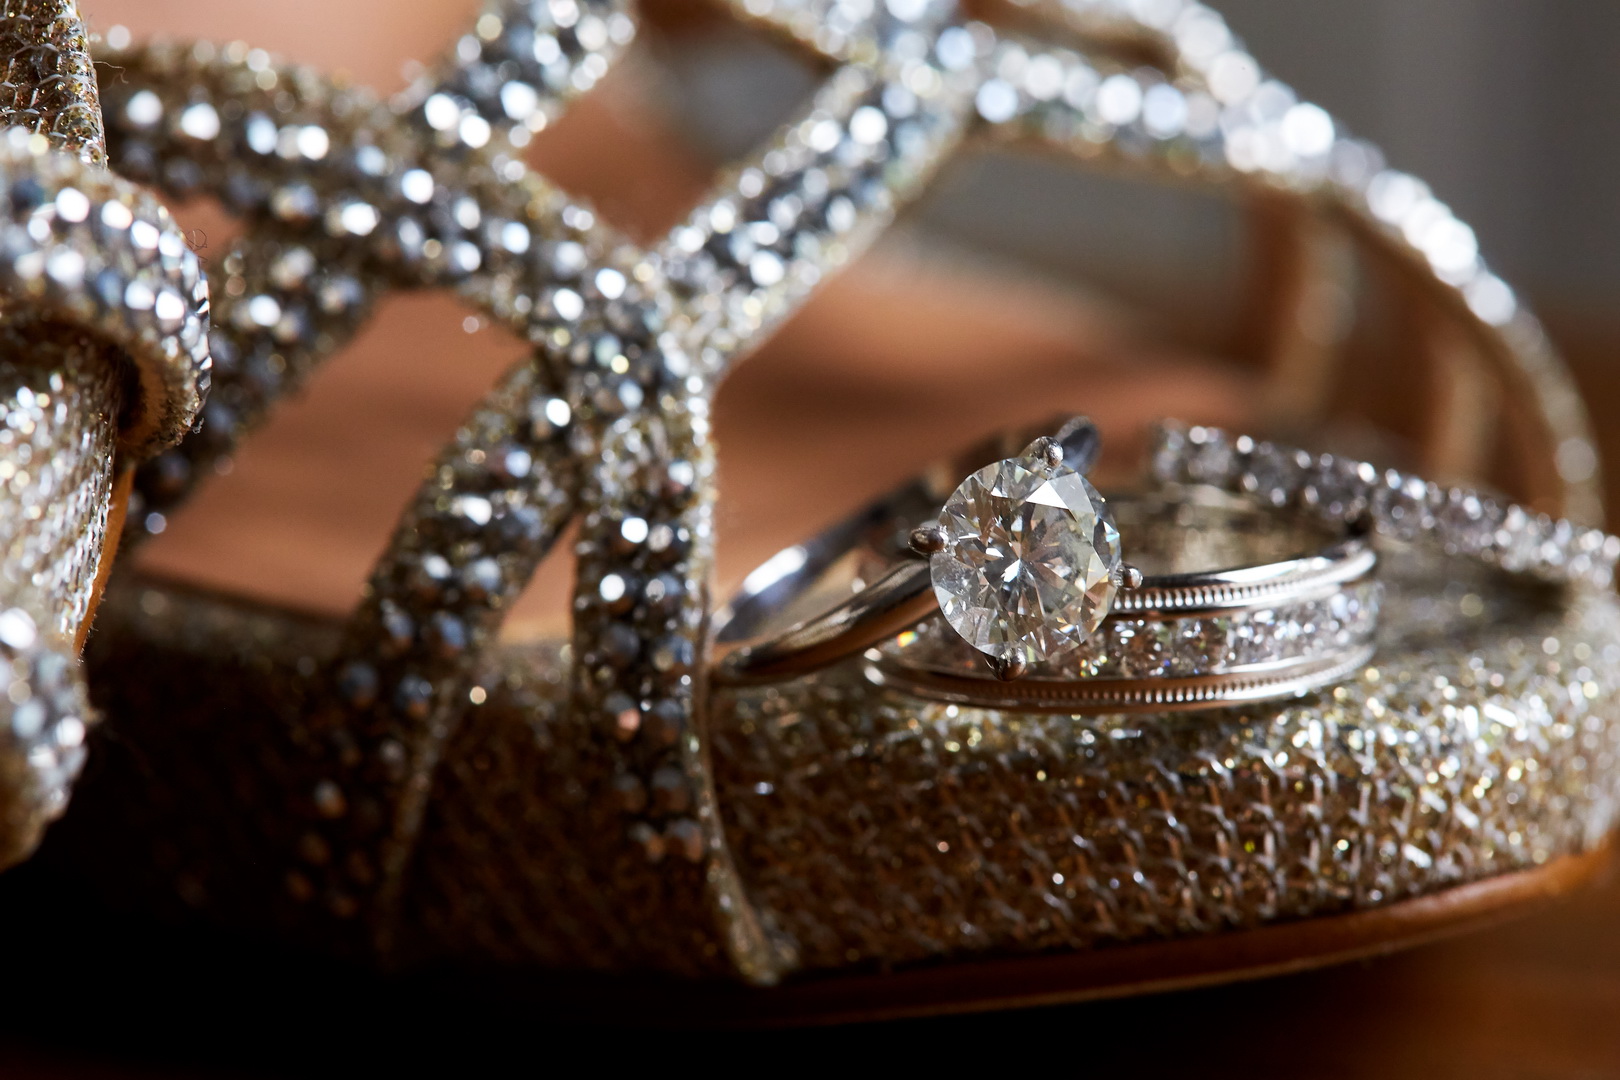 Close up of diamond engagement ring and wedding bands on toe of jeweled shoe of bride